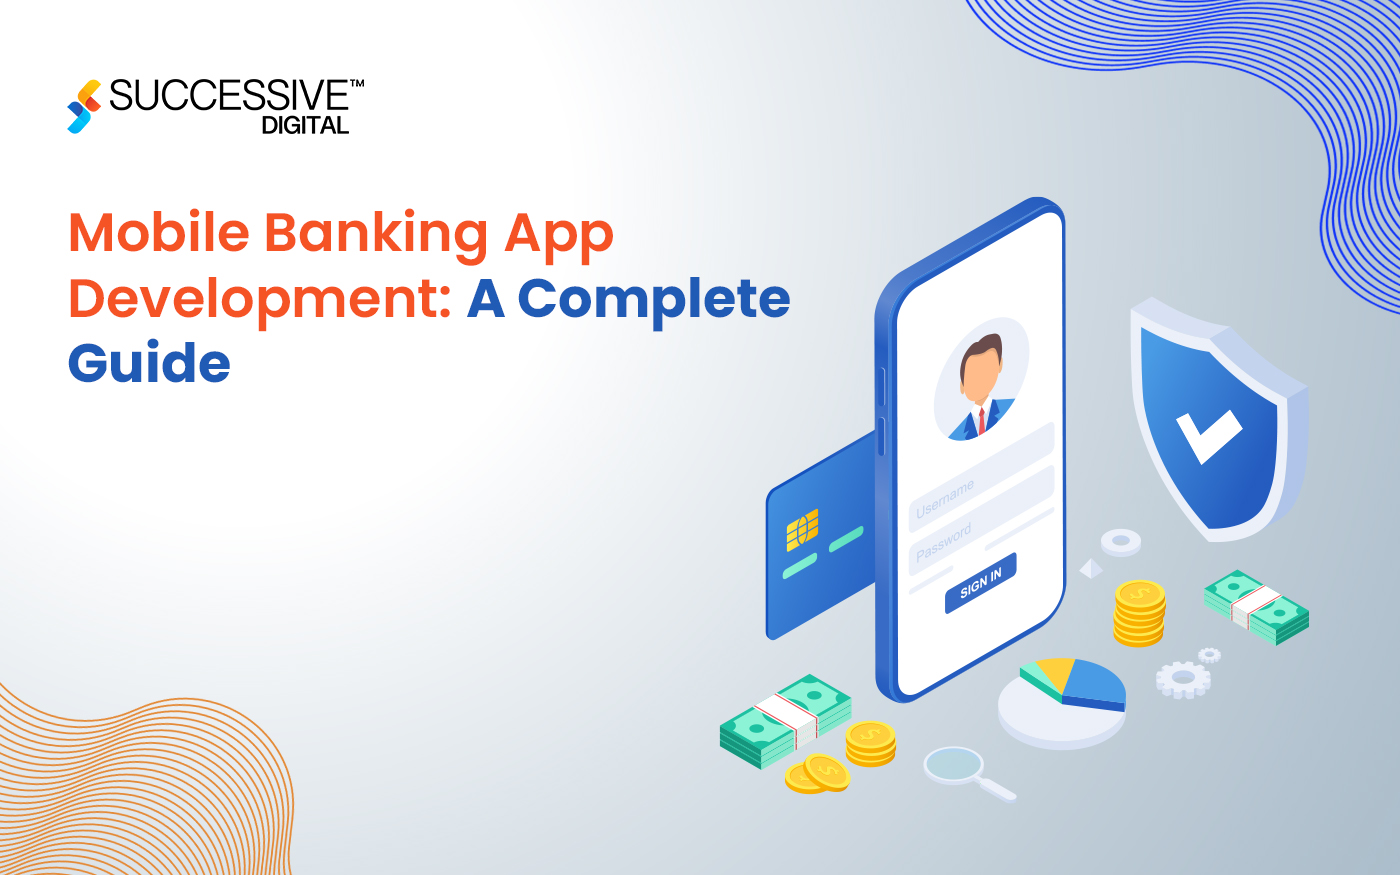 Mobile Banking App Development: A Complete Guide